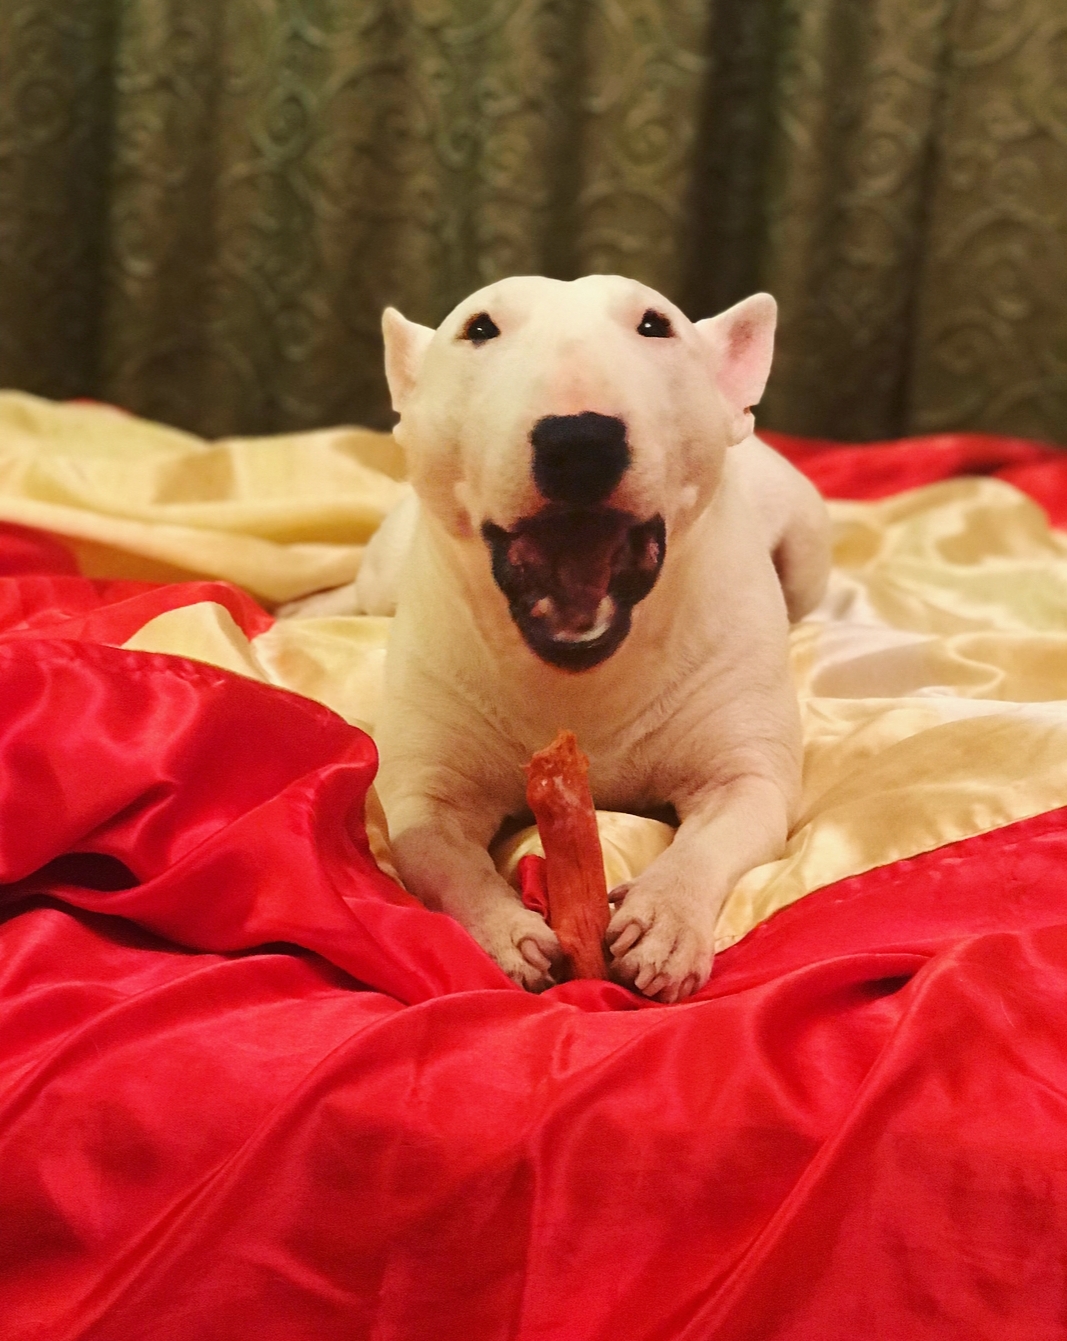 white Bull Terrier lying on the bed while opening and mouth and a hotdog on its hands